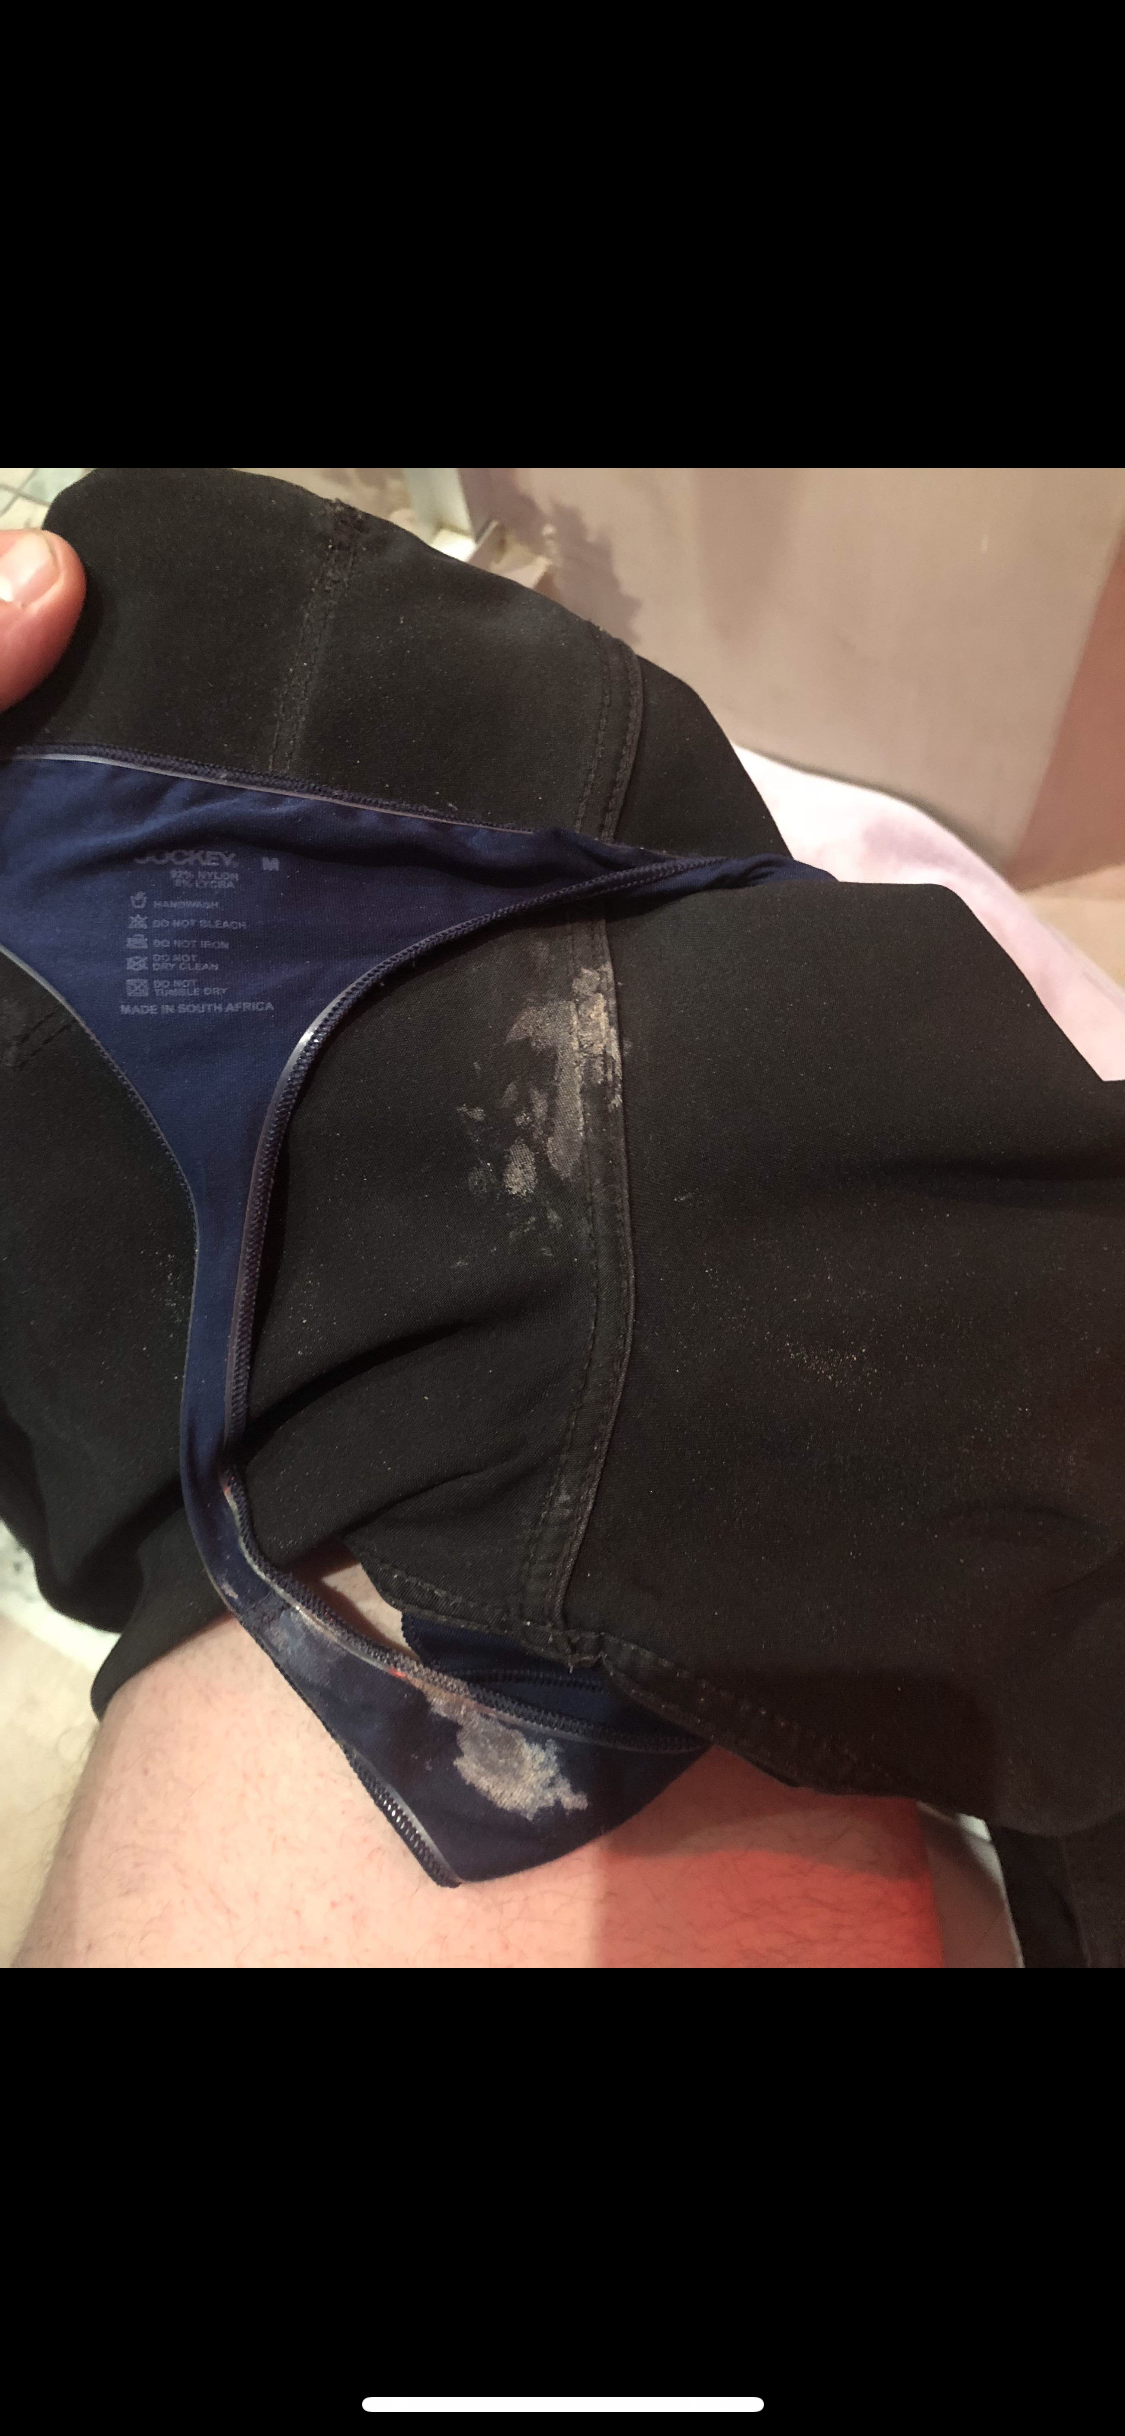 Photo by Cheatingwife101 with the username @Jkd082,  July 18, 2019 at 4:08 AM. The post is about the topic Cheating Wifes/Girlfriends and the text says 'My wife’s  pants and panties after her ladies night out...!'